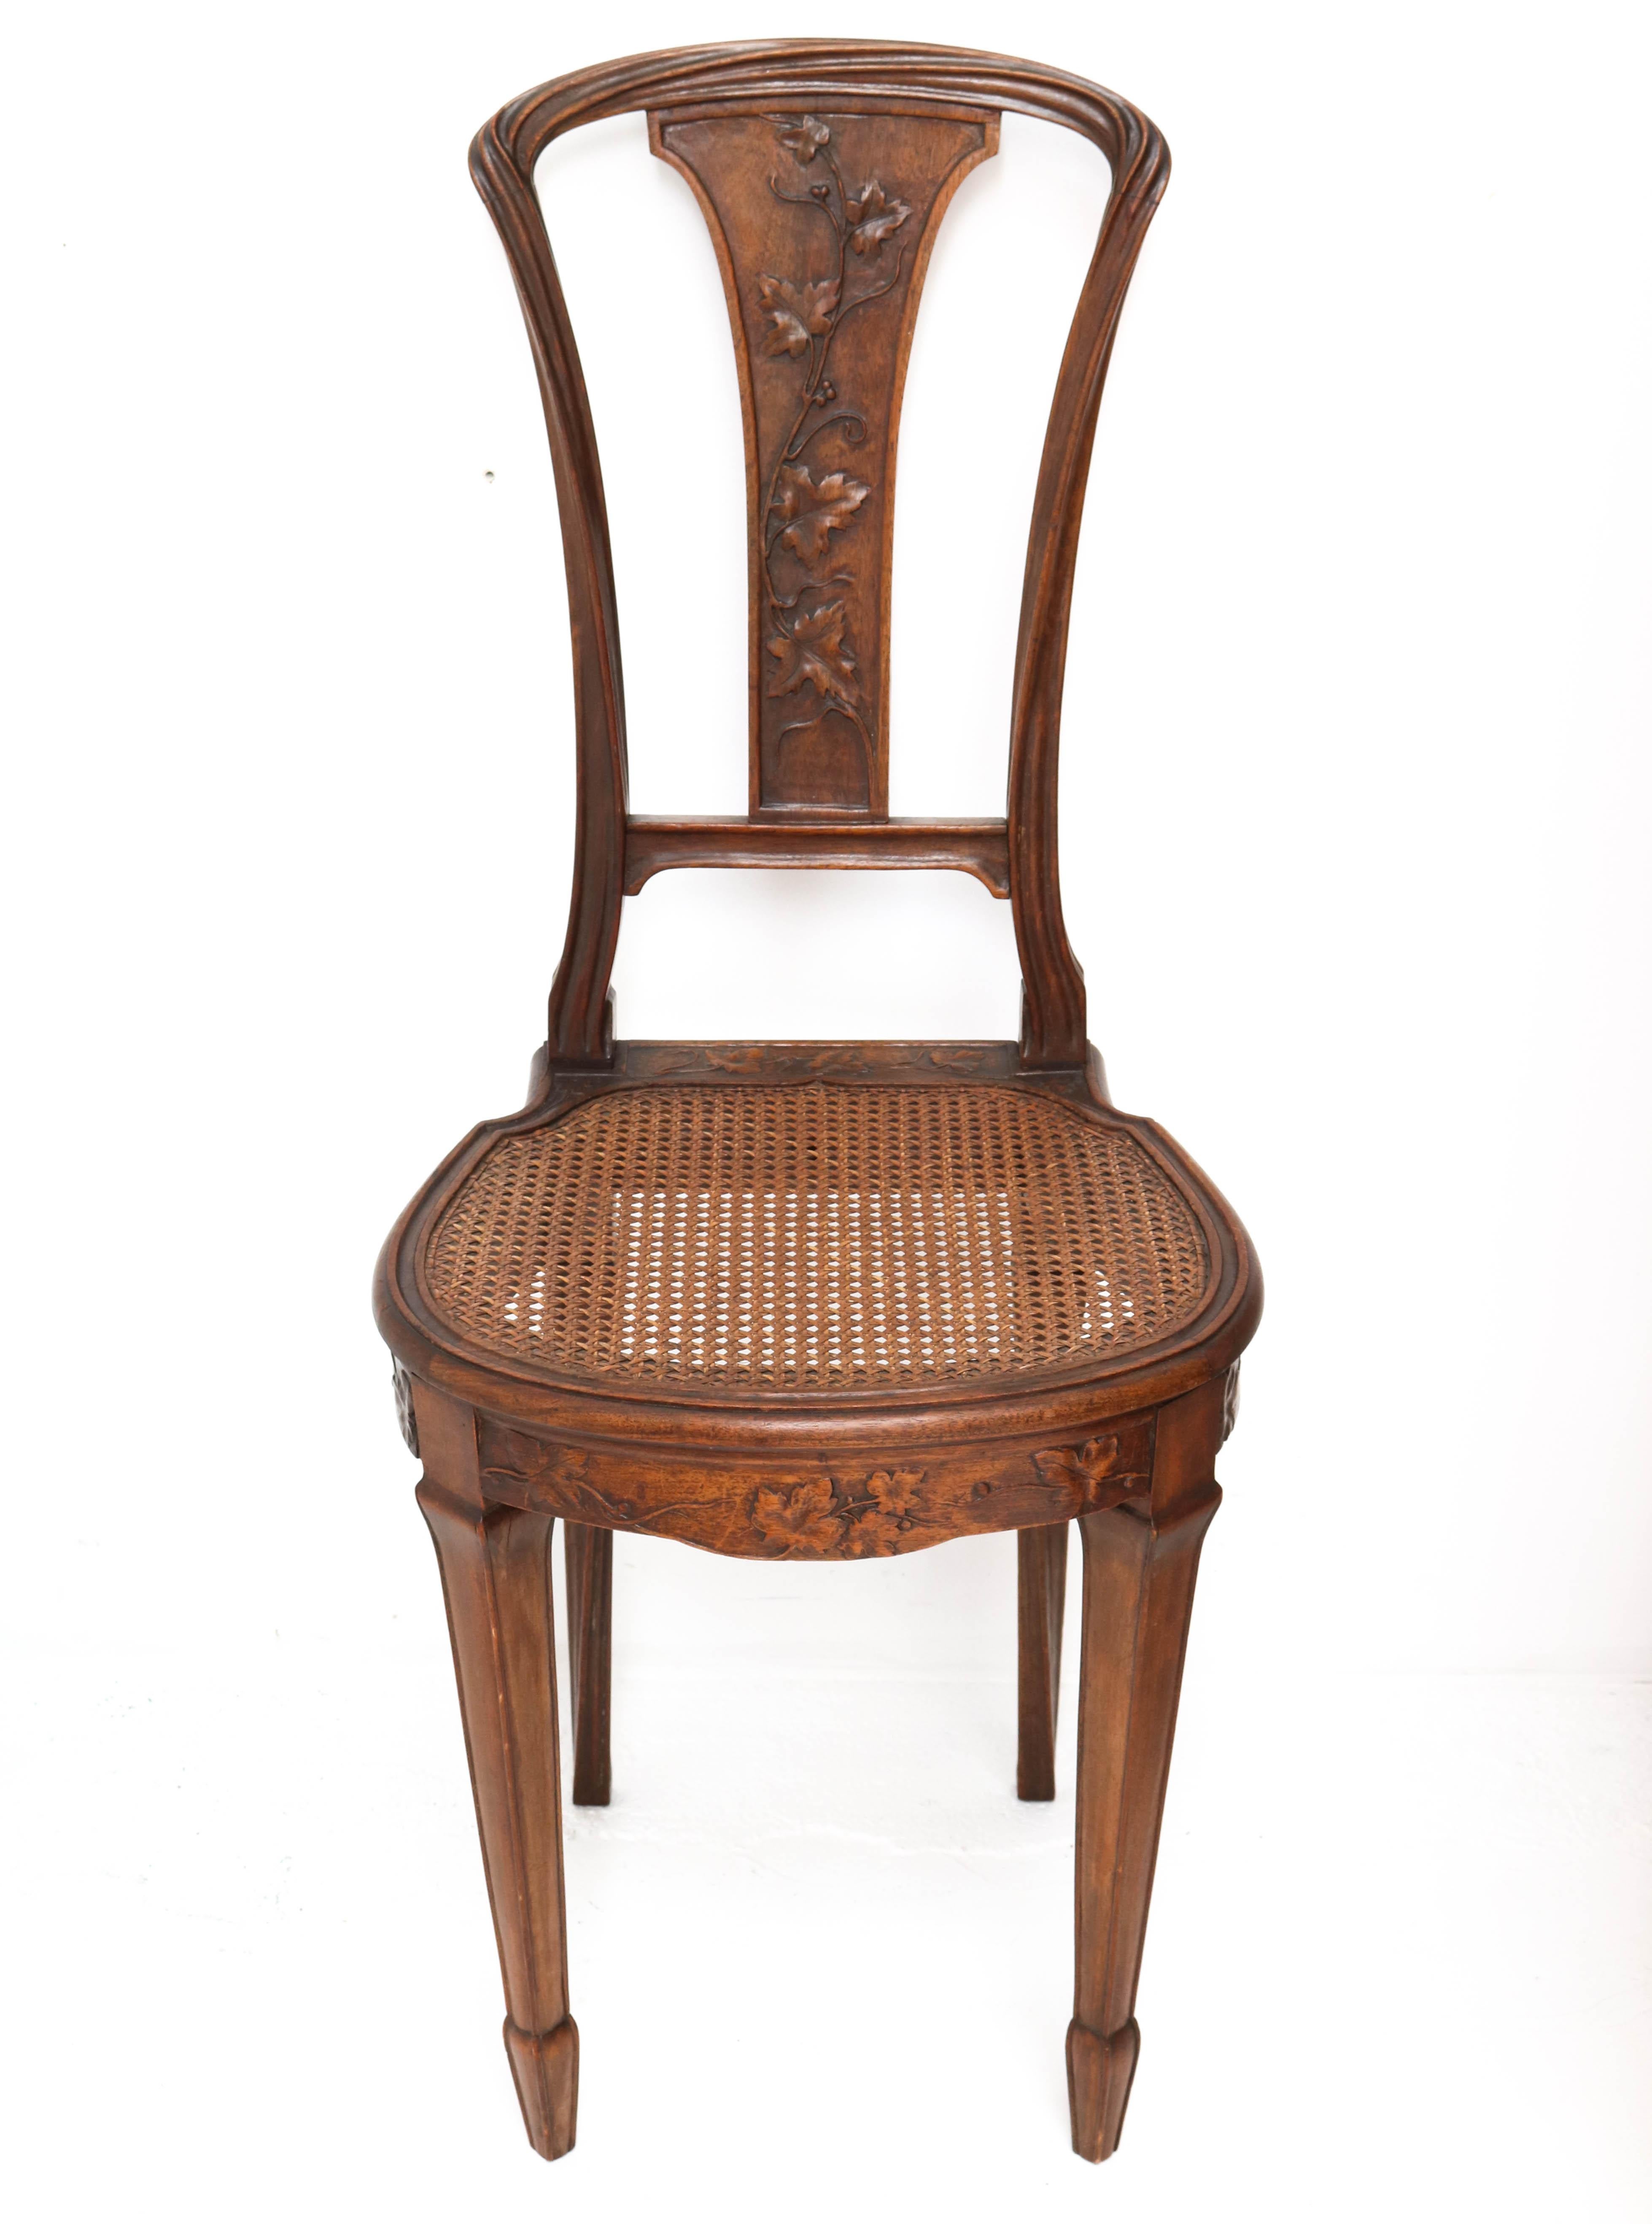 Early 20th Century French Walnut Art Nouveau Side Chair Attributed to Louis Majorelle, 1900s